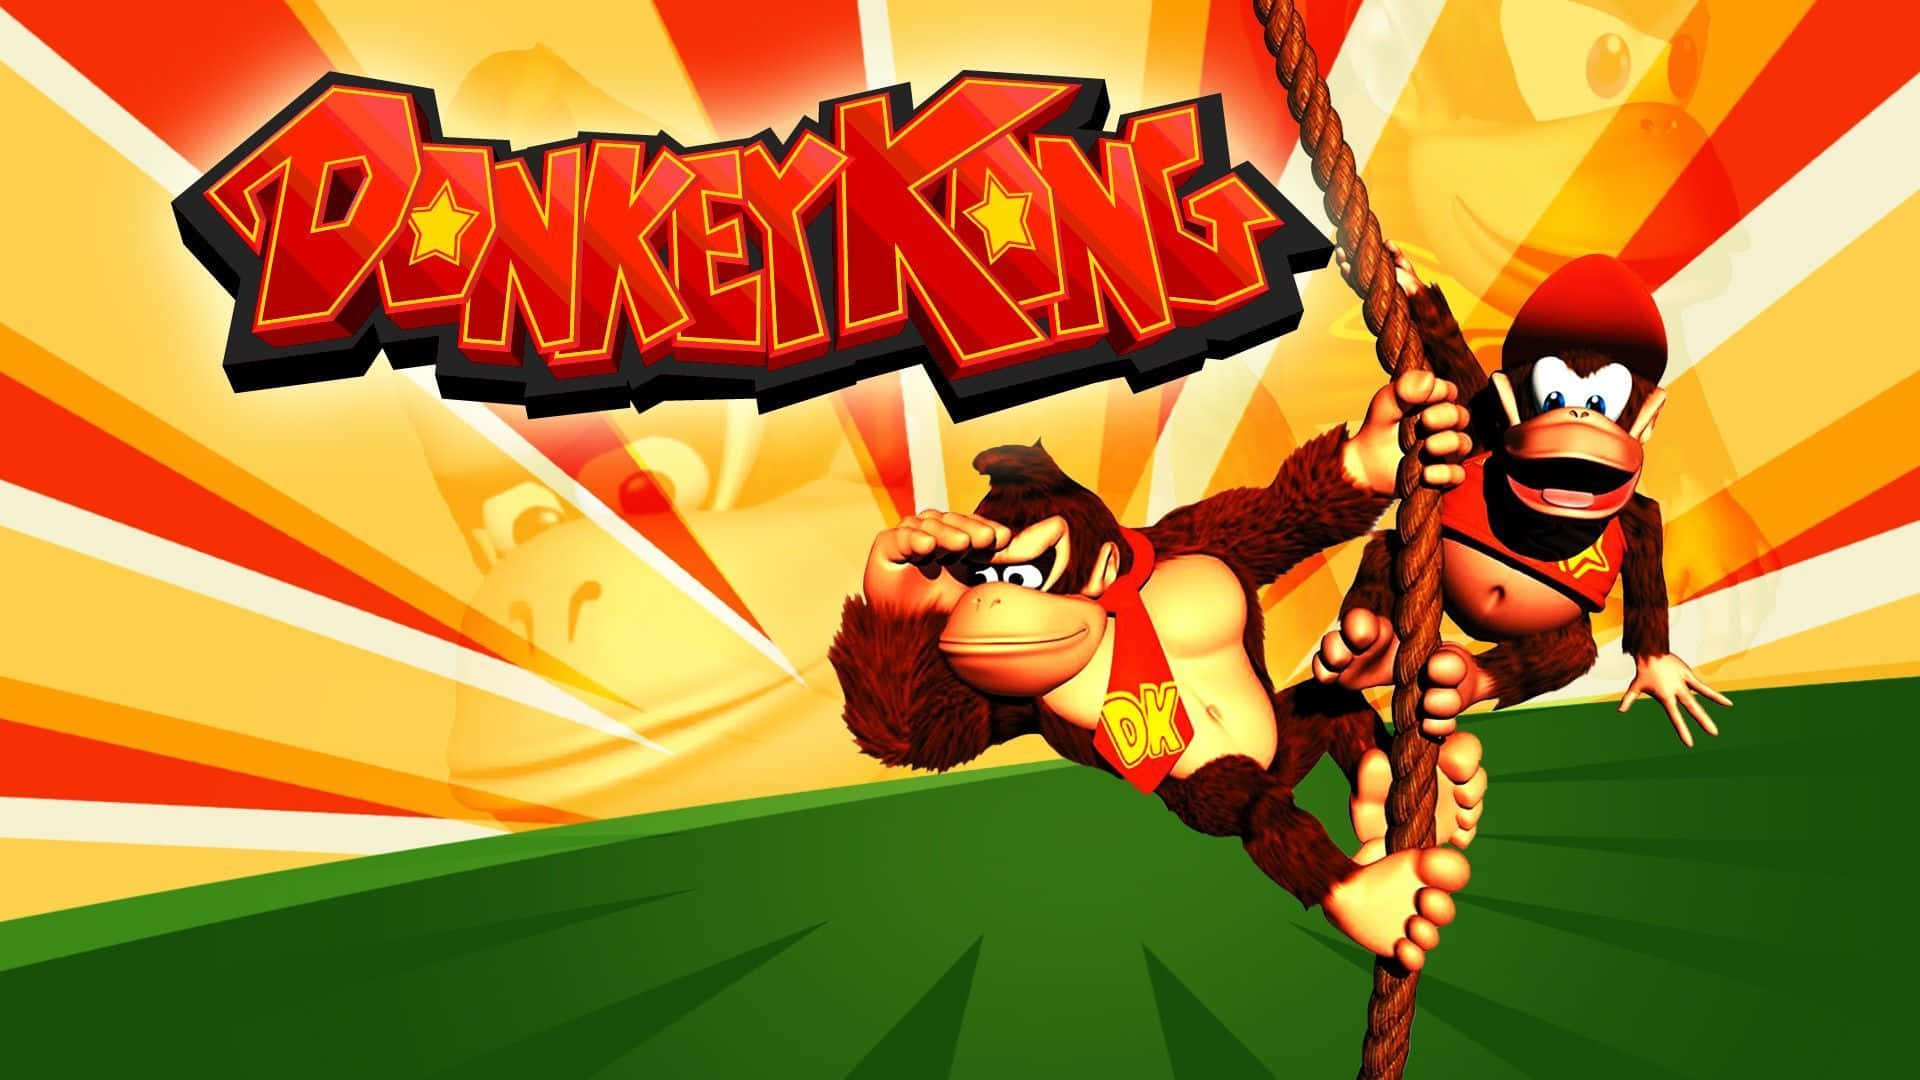 Donkey Kong In Action, Smashing Barrels And Overcoming Obstacles